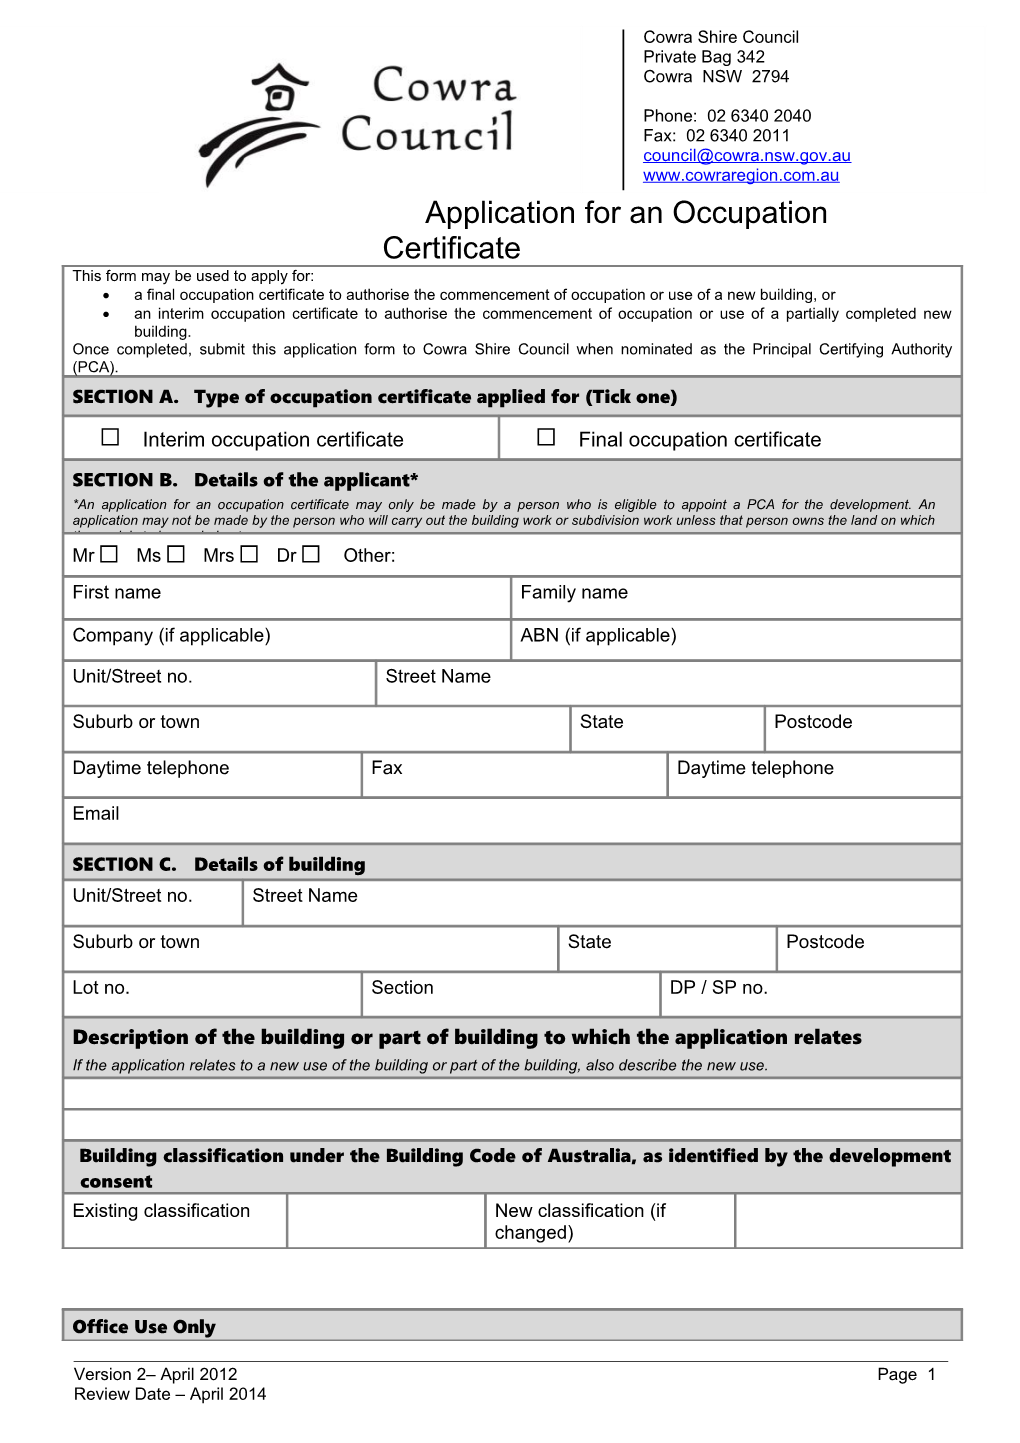 Application for an Occupation Certificate